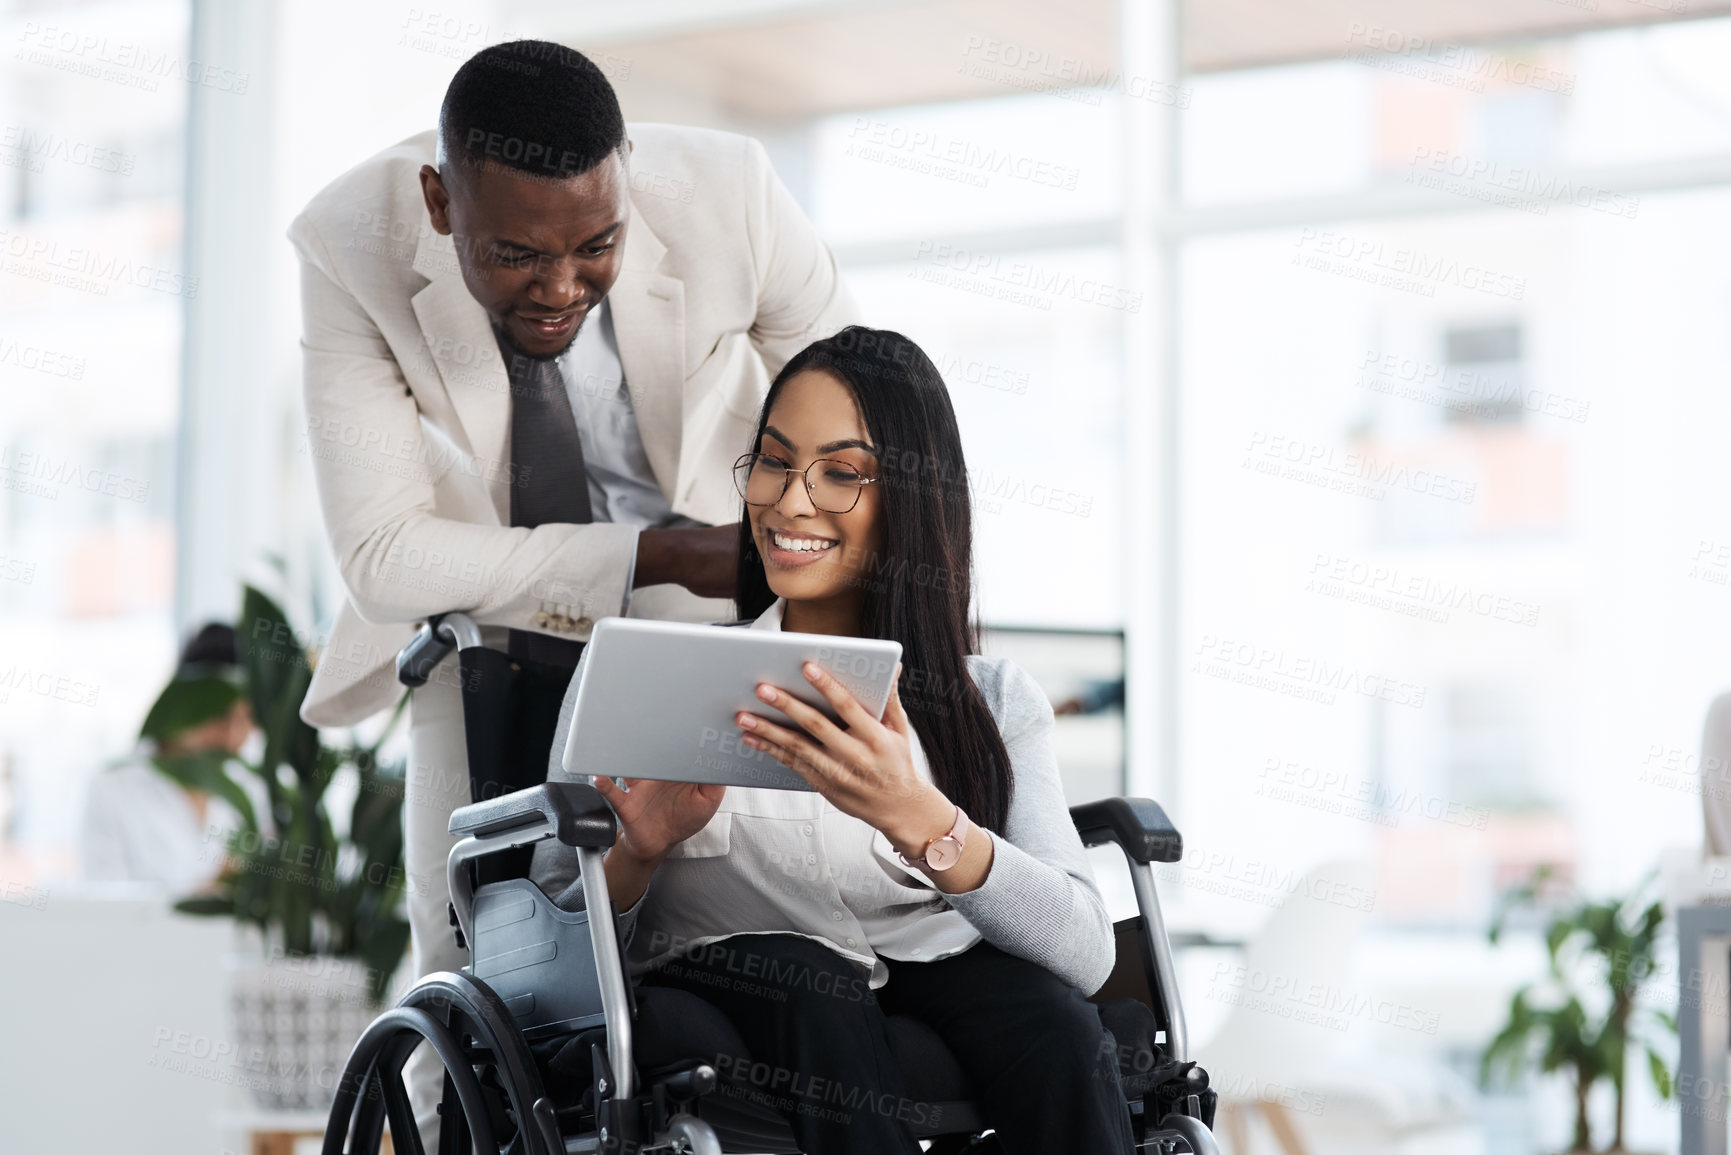 Buy stock photo Cropped shot of an attractive young businesswoman in a wheelchair talking to the male colleague pushing her through the office